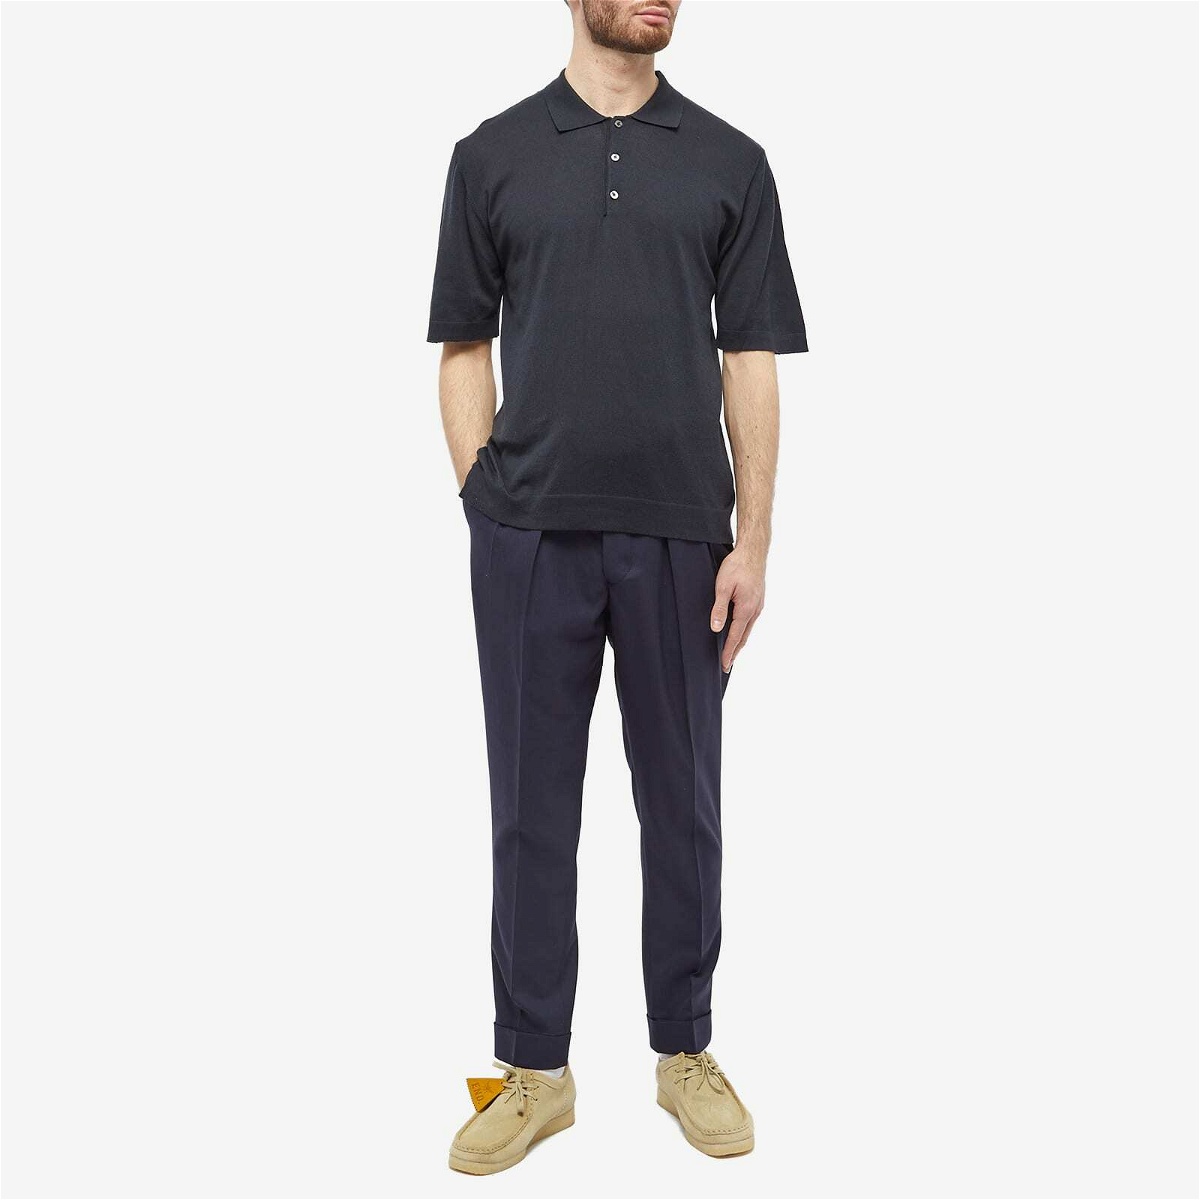 Officine Generale Men's Officine Générale Brutus Knitted Polo Shirt in ...